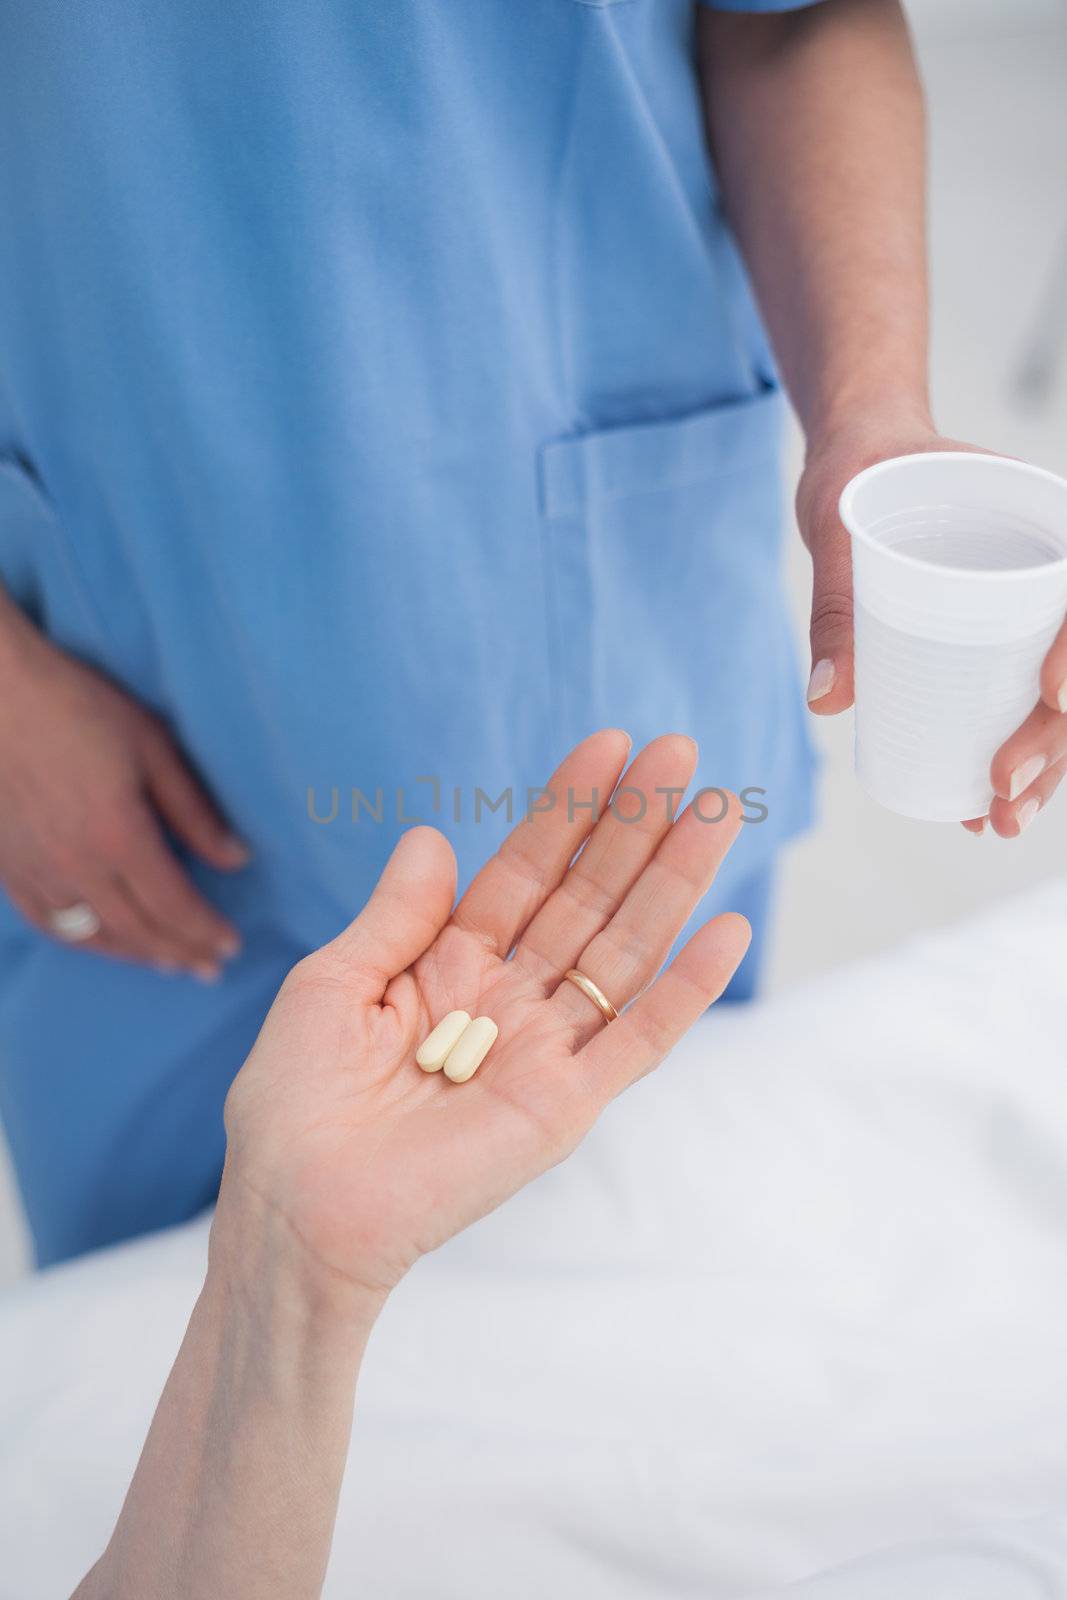 Nurse giving plastic glass to a patient by Wavebreakmedia